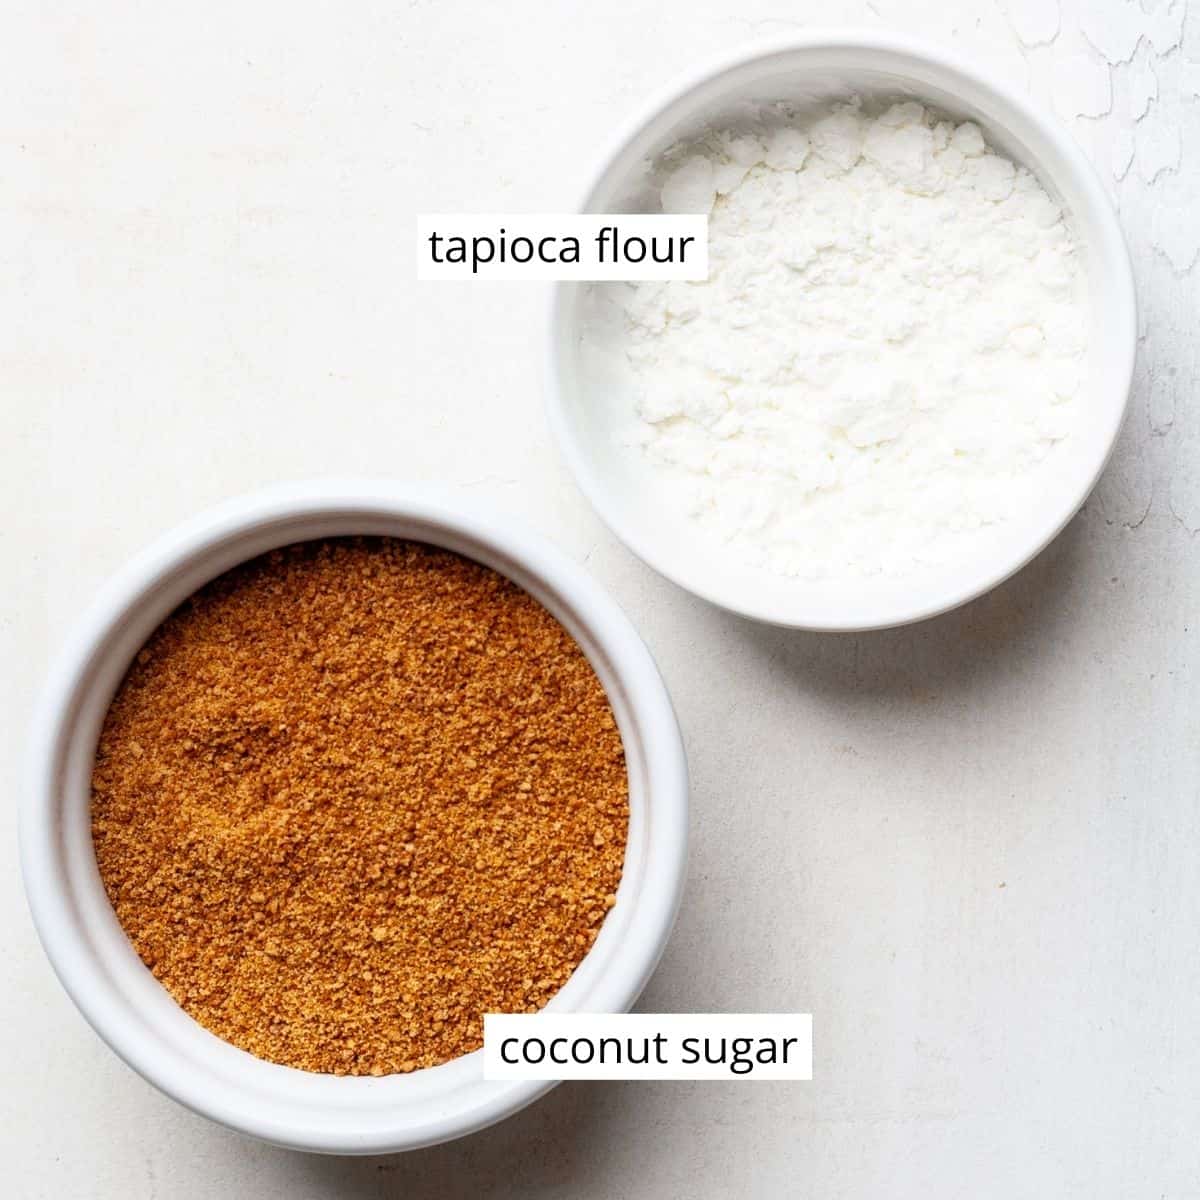 the ingredients in this paleo powdered sugar recipe